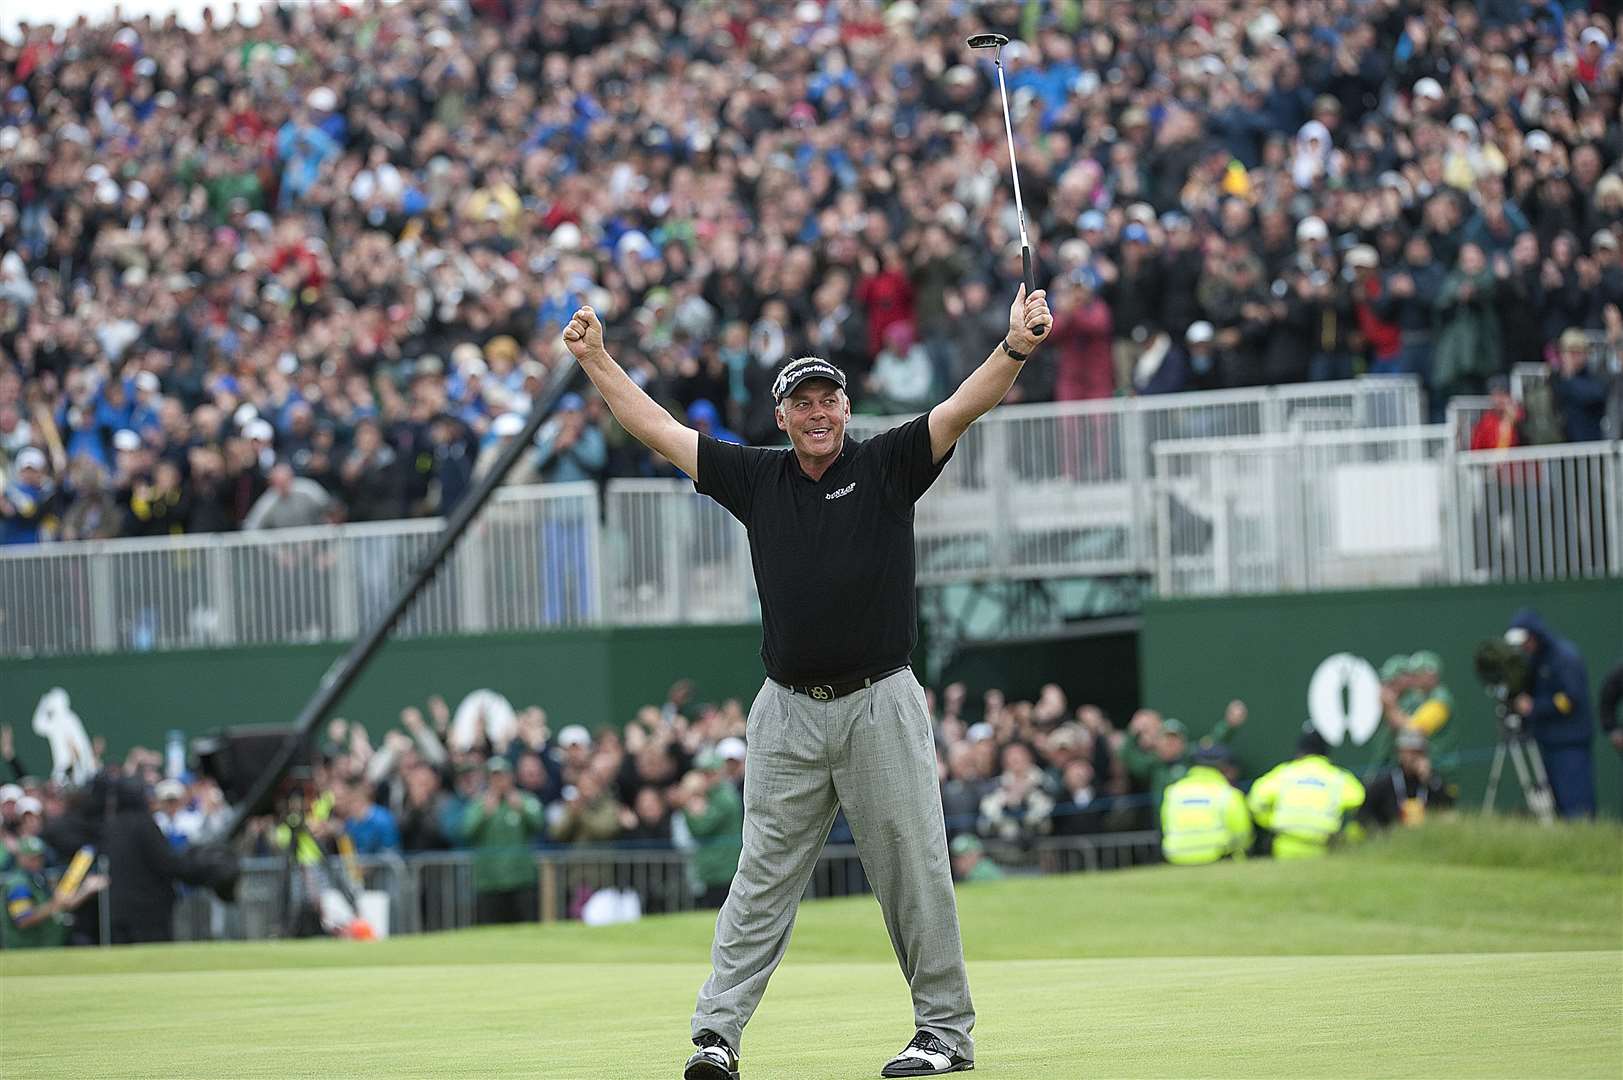 Royal St George's was packed with spectators to see Darren Clarke win The Open 2011. Picture Barry Goodwin